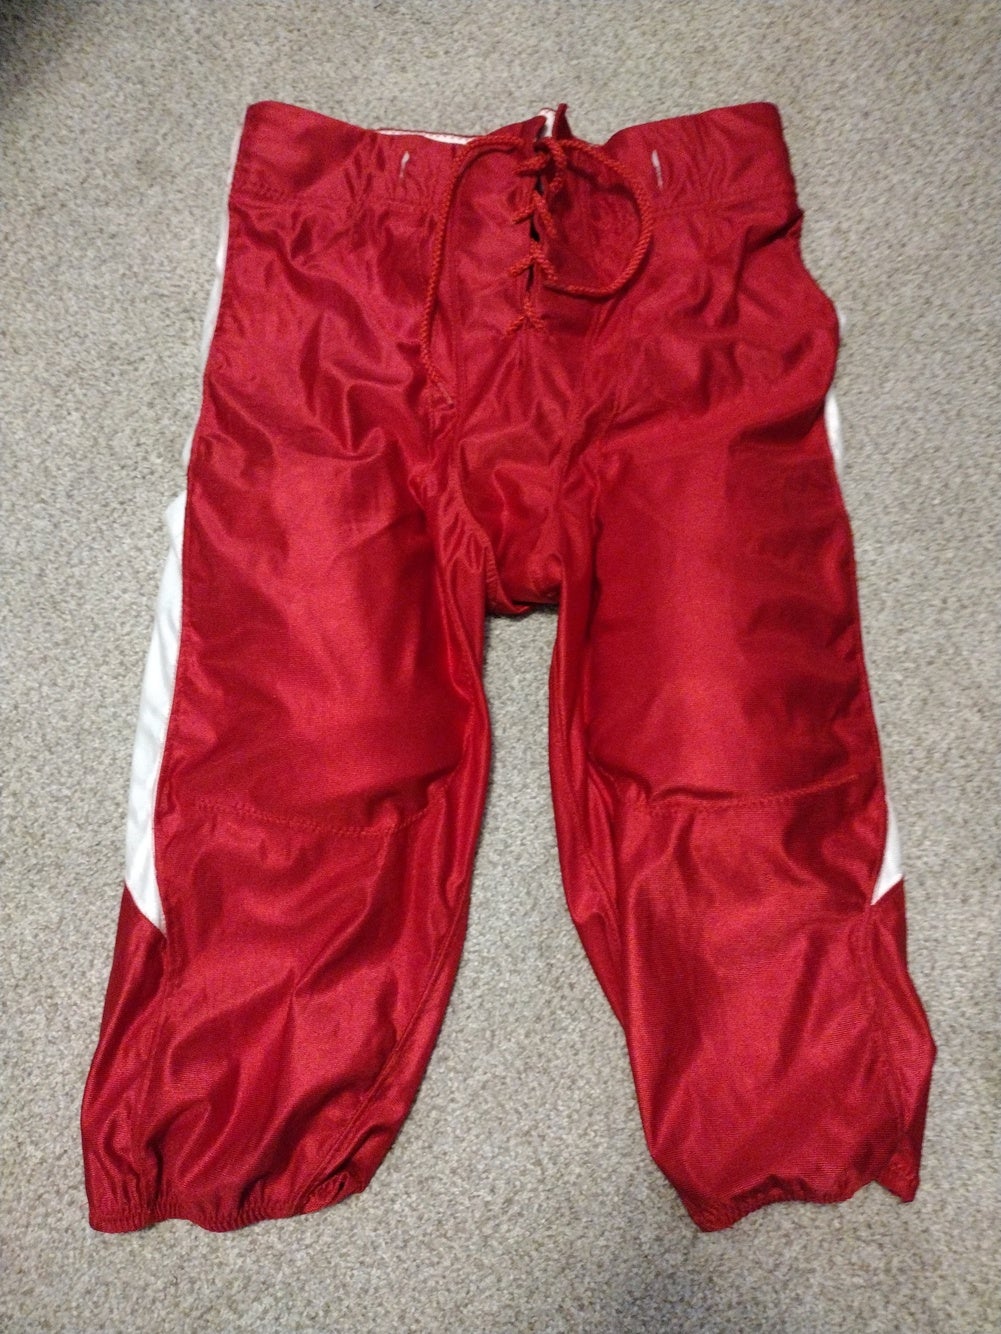 Details about   MEN'S RED USED Football PANTS ADULT XL 